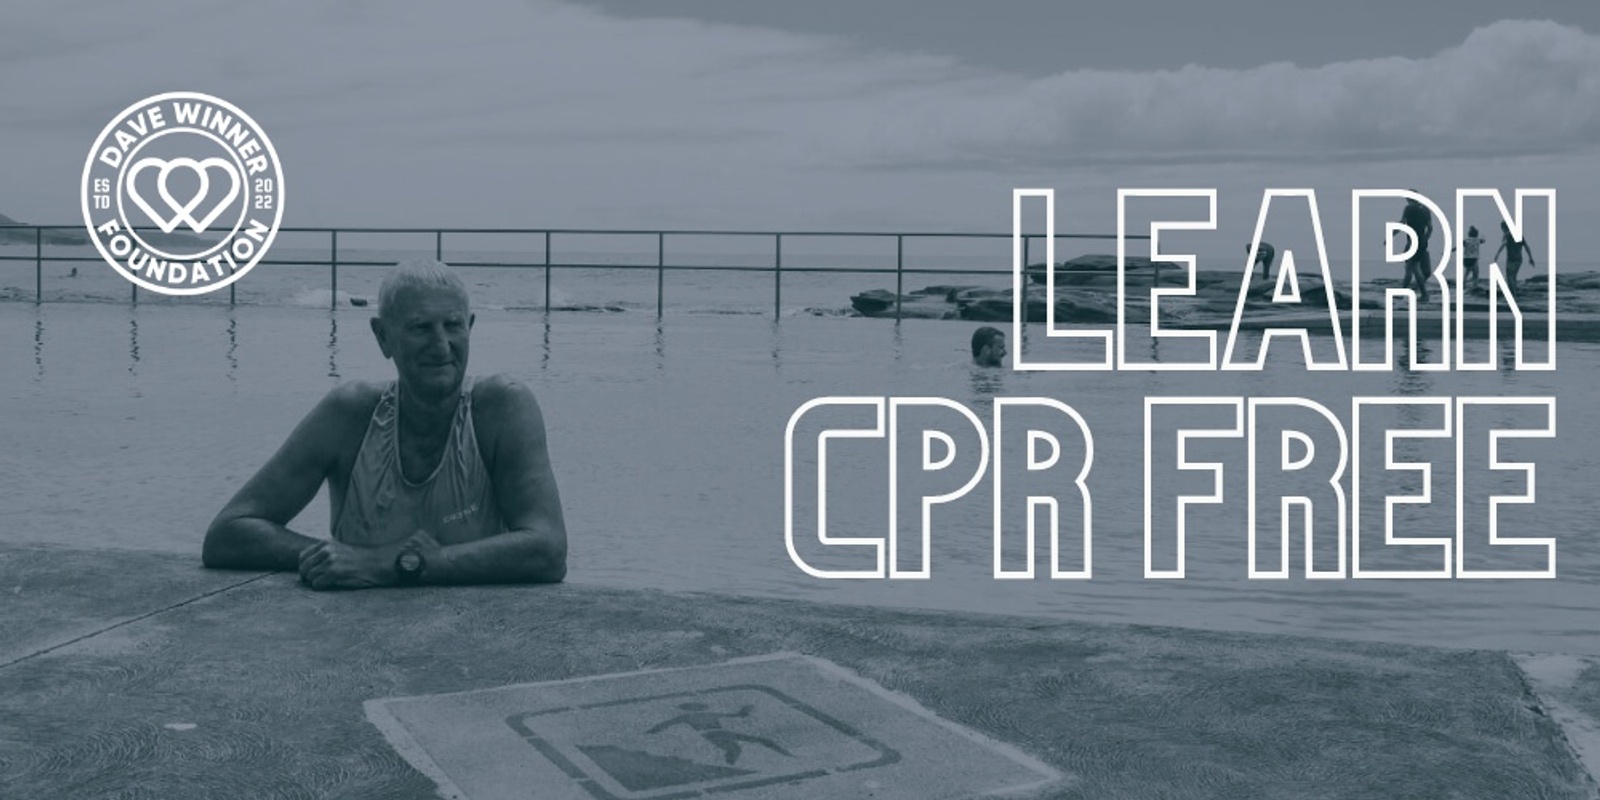 Banner image for Winner Foundation: Free CPR Training #14